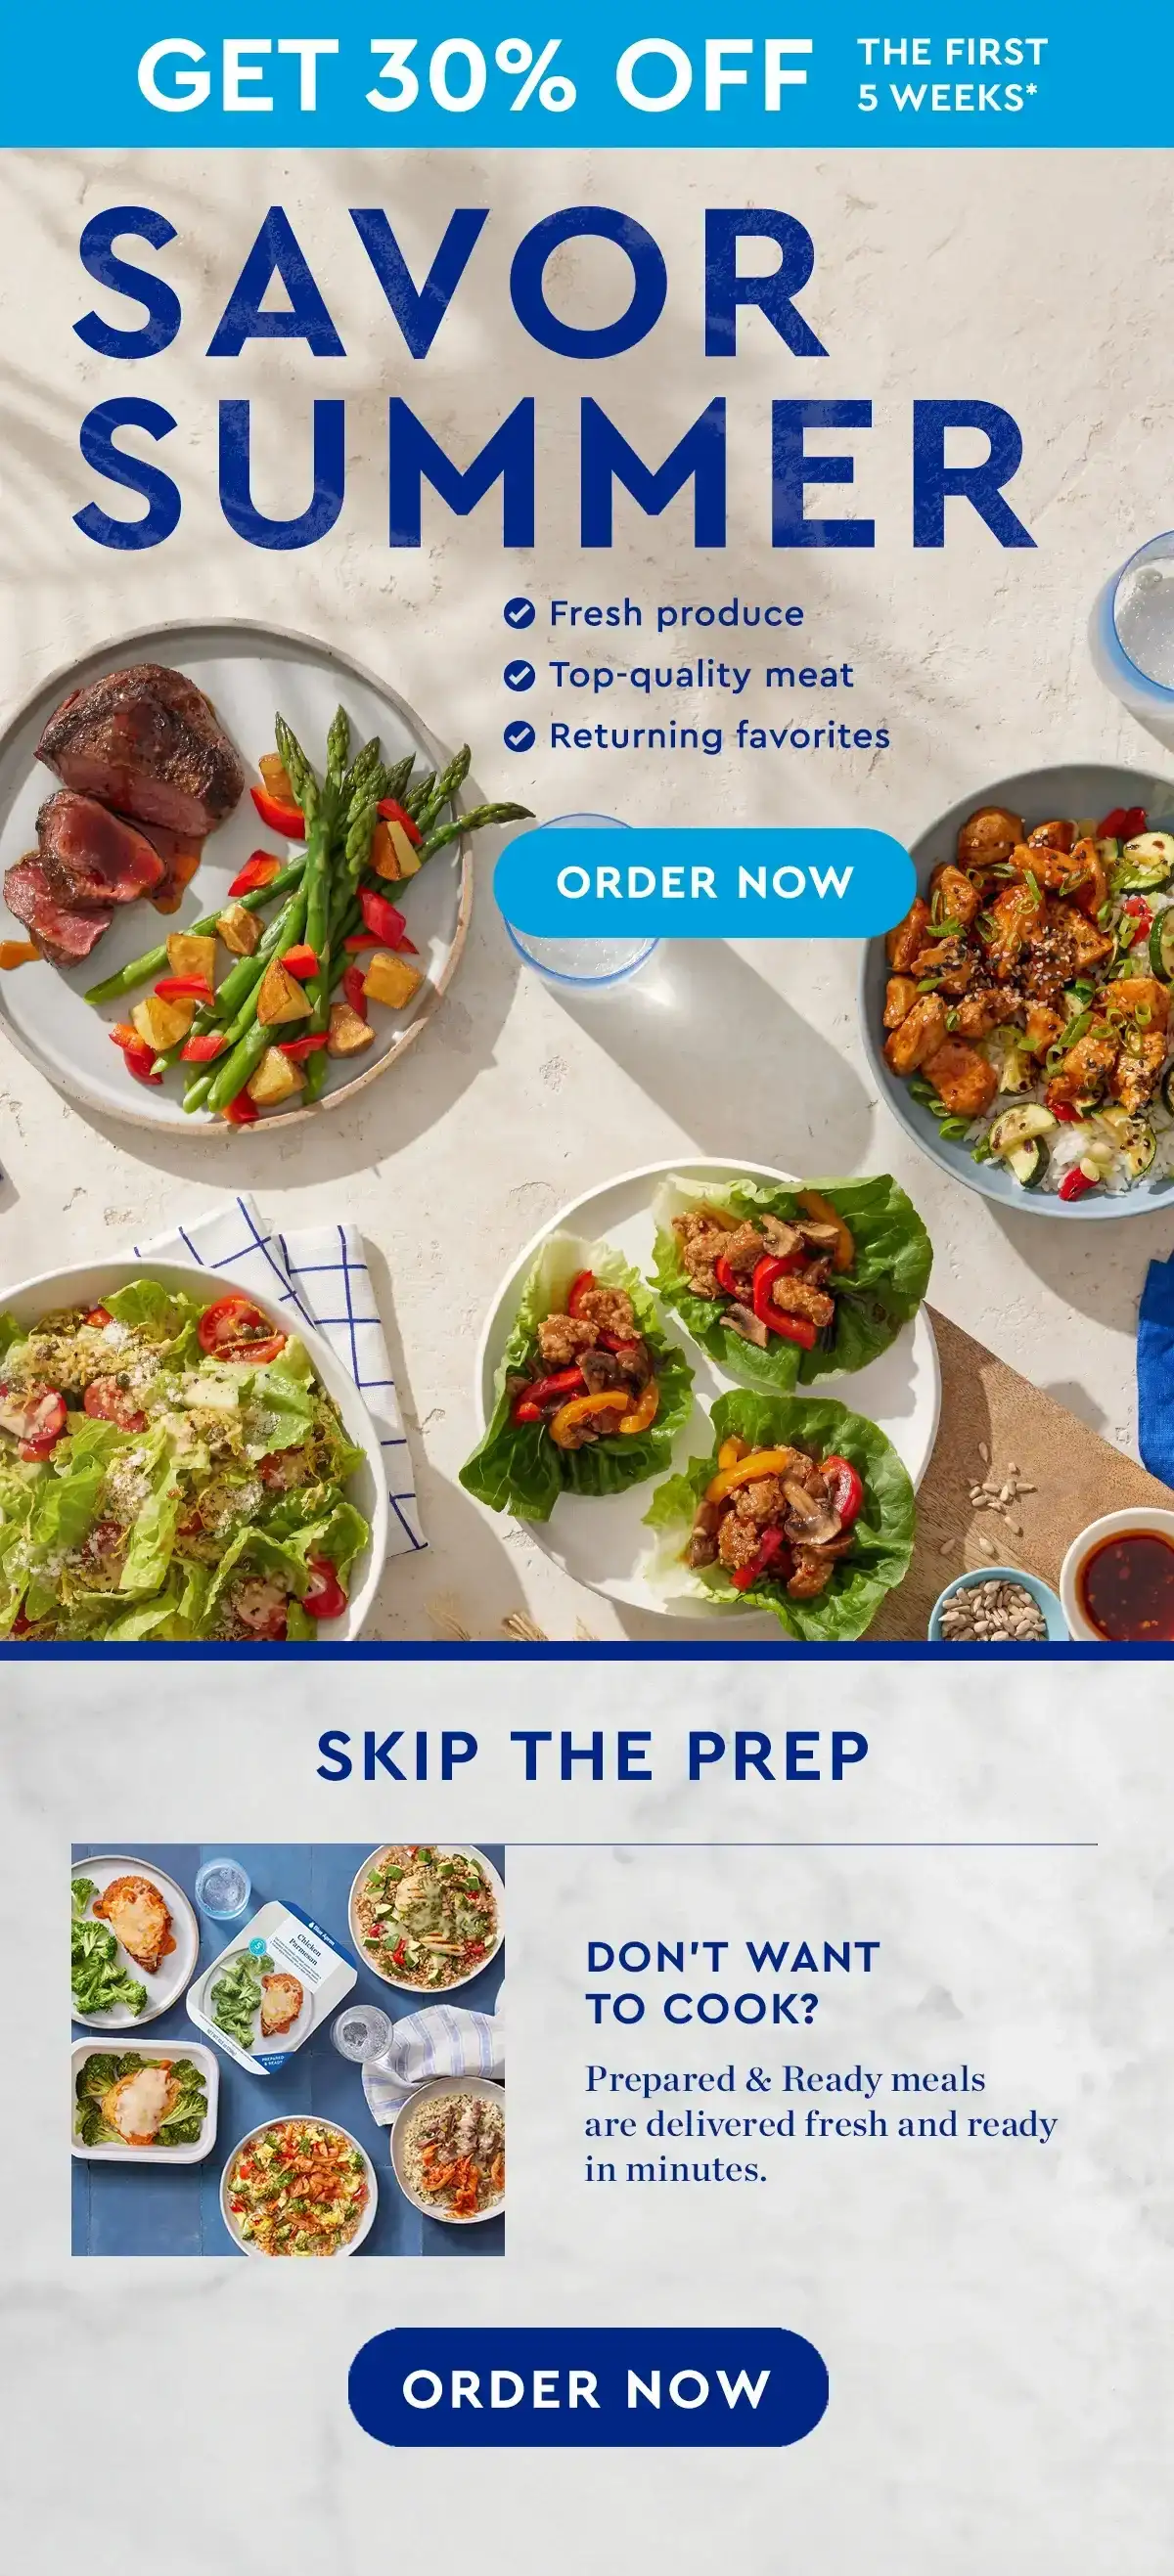 Savor Summer | Fresh produce, top-quality meat, returning favorites | ORDER NOW | Skip the Prep - Don't want to cook? Prepared & Ready meals are delivered fresh and ready in minutes | Order Now